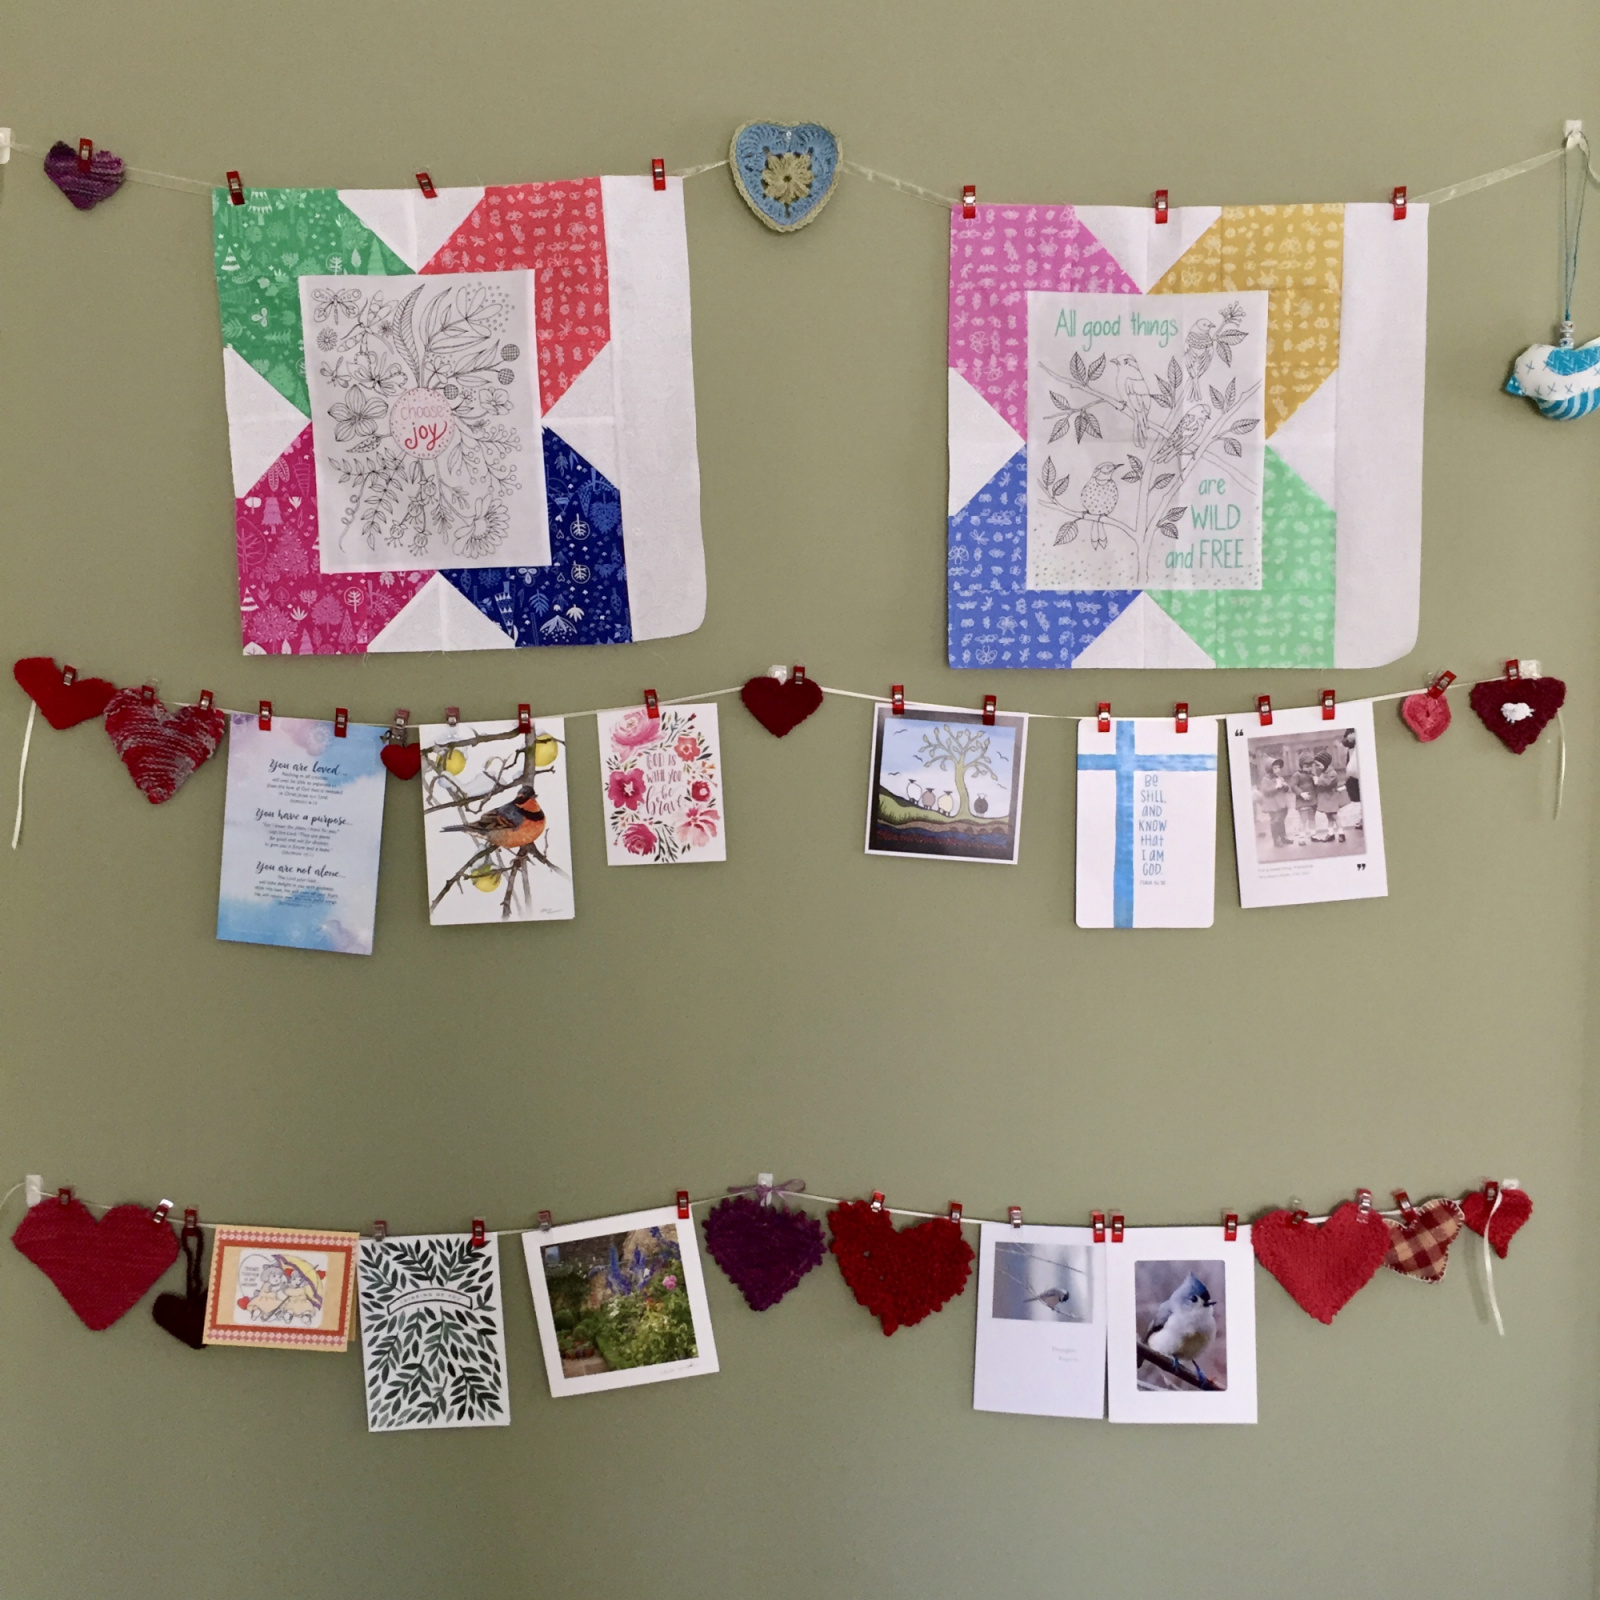 This is my joy wall with cards and hearts. If your card or heart isn't here, it is on the fireplace mantle or in a basket. I will get these hearts out every February as a reminder of your kindness and support.